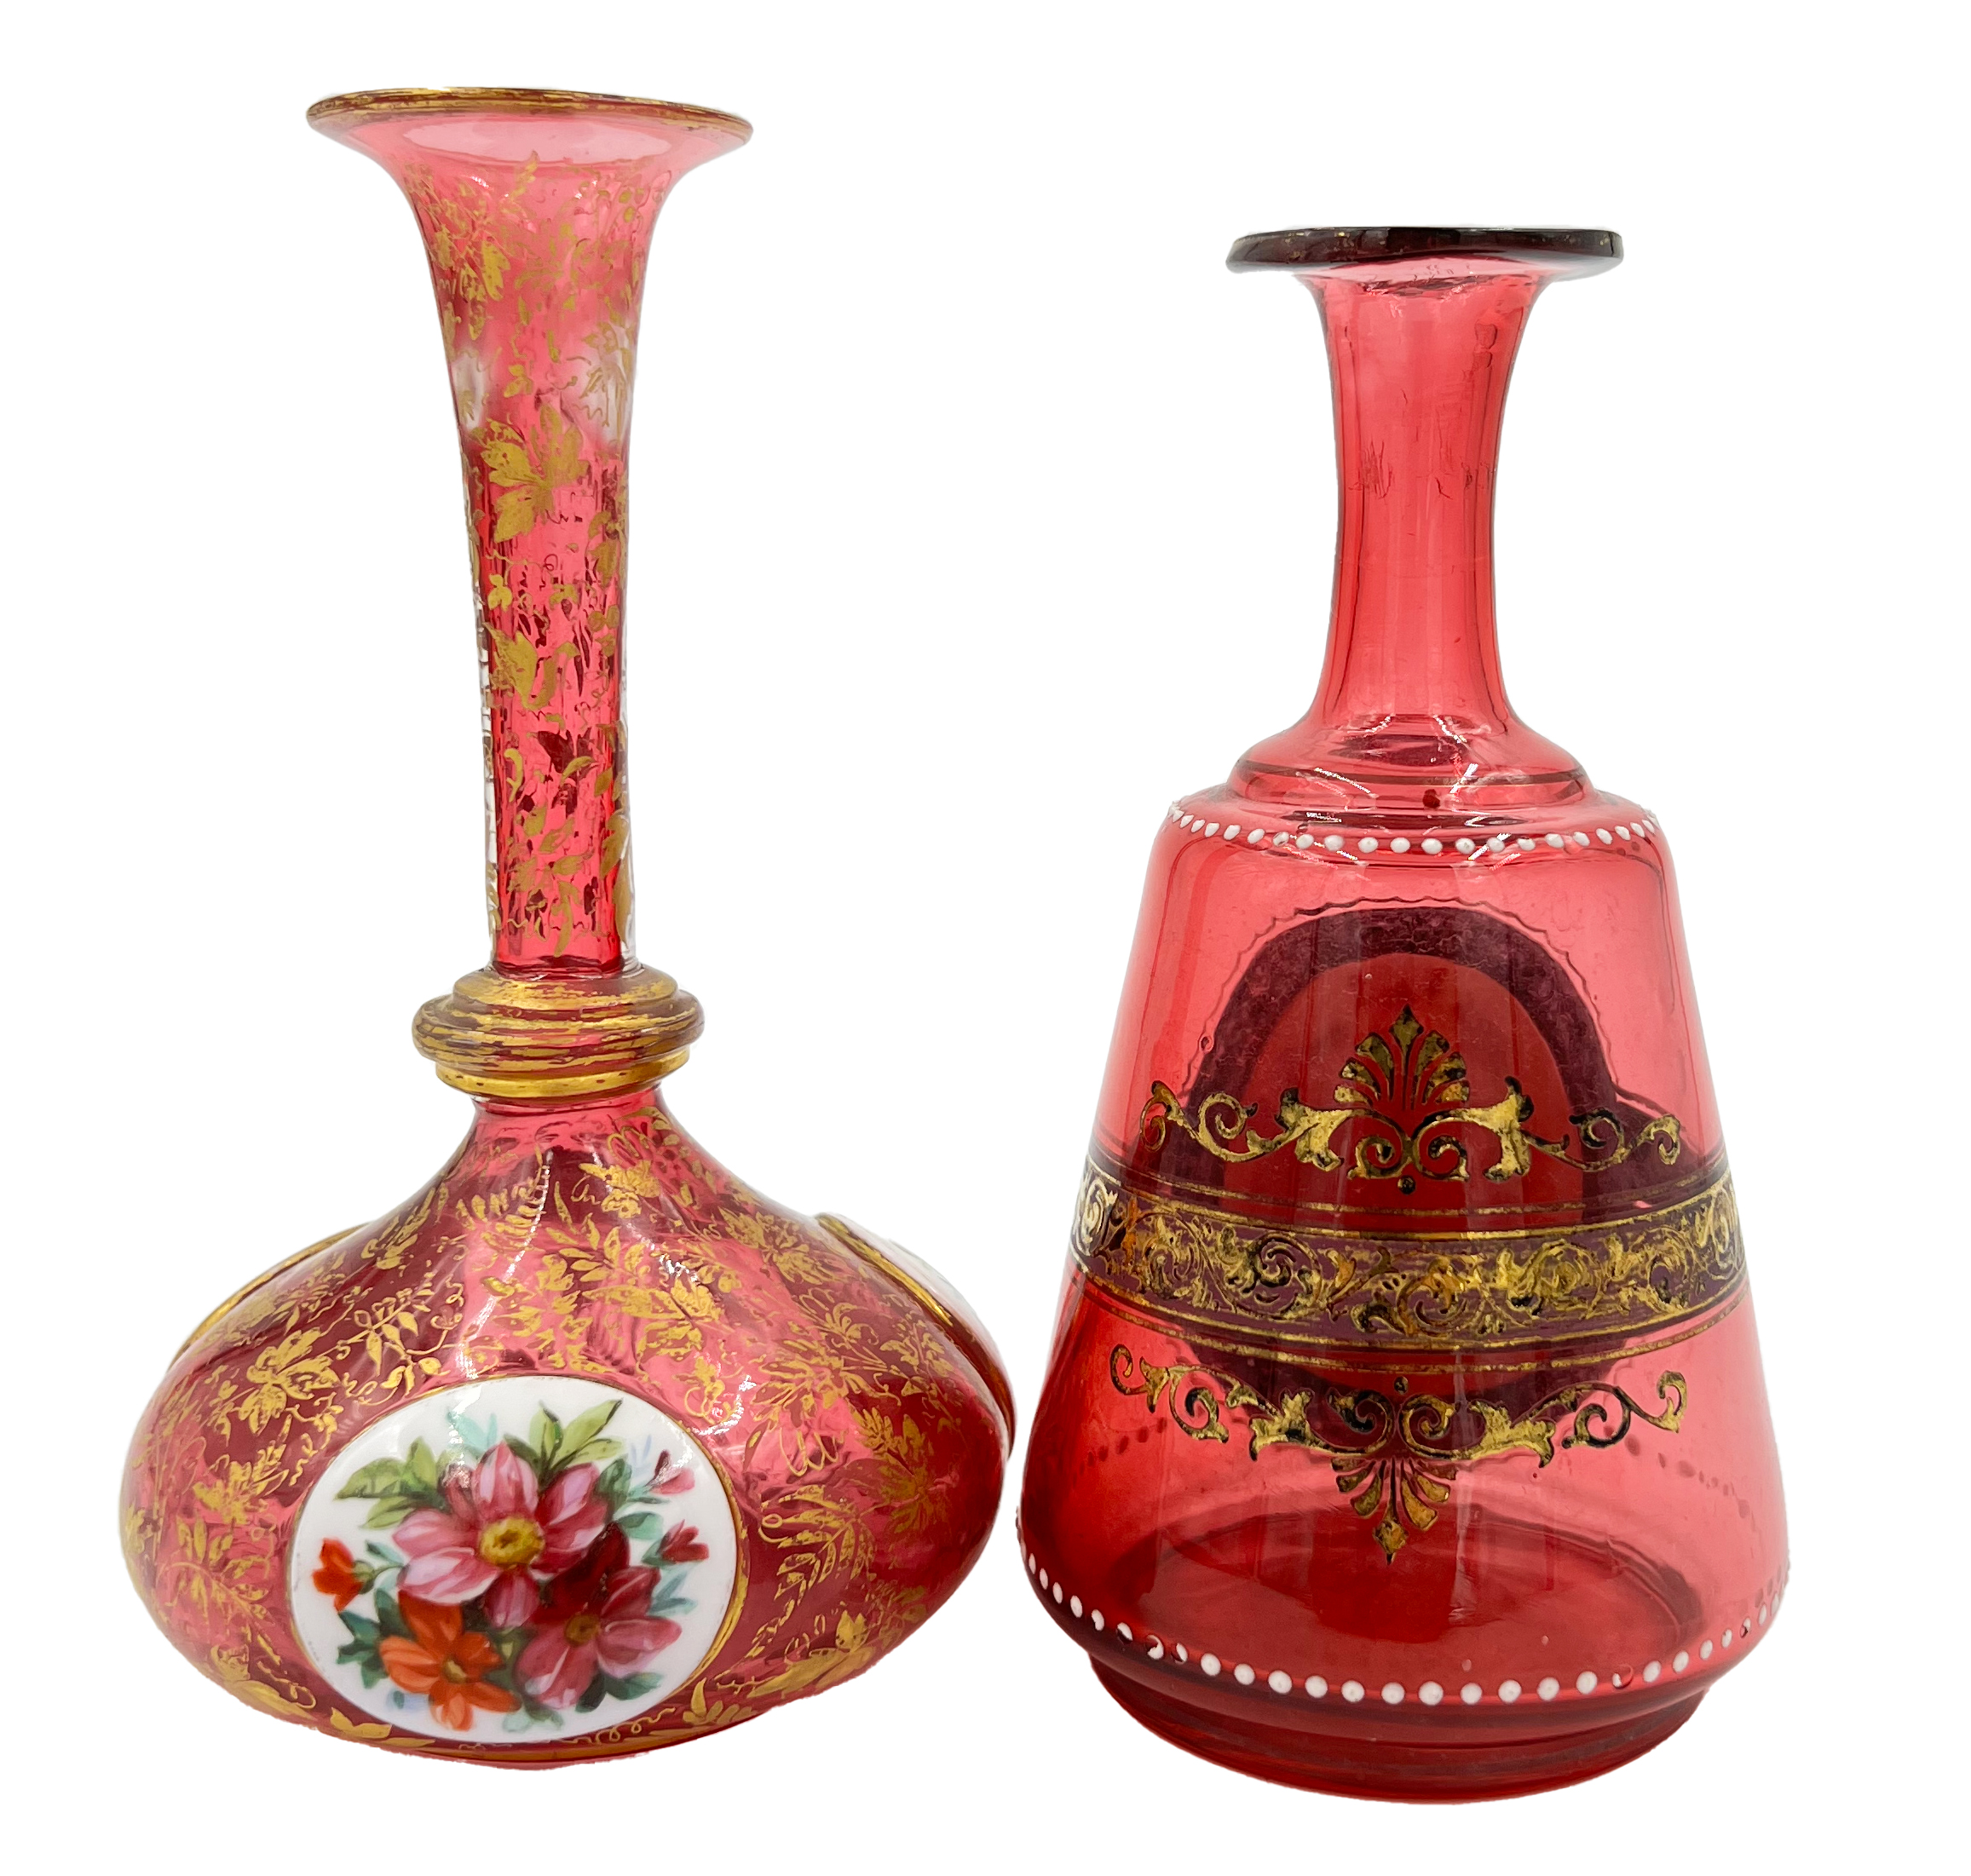 TWO RED BOHEMIAN GLASS VASES WITH OVAL PLAQUES, 19TH CENTURY - Image 3 of 3